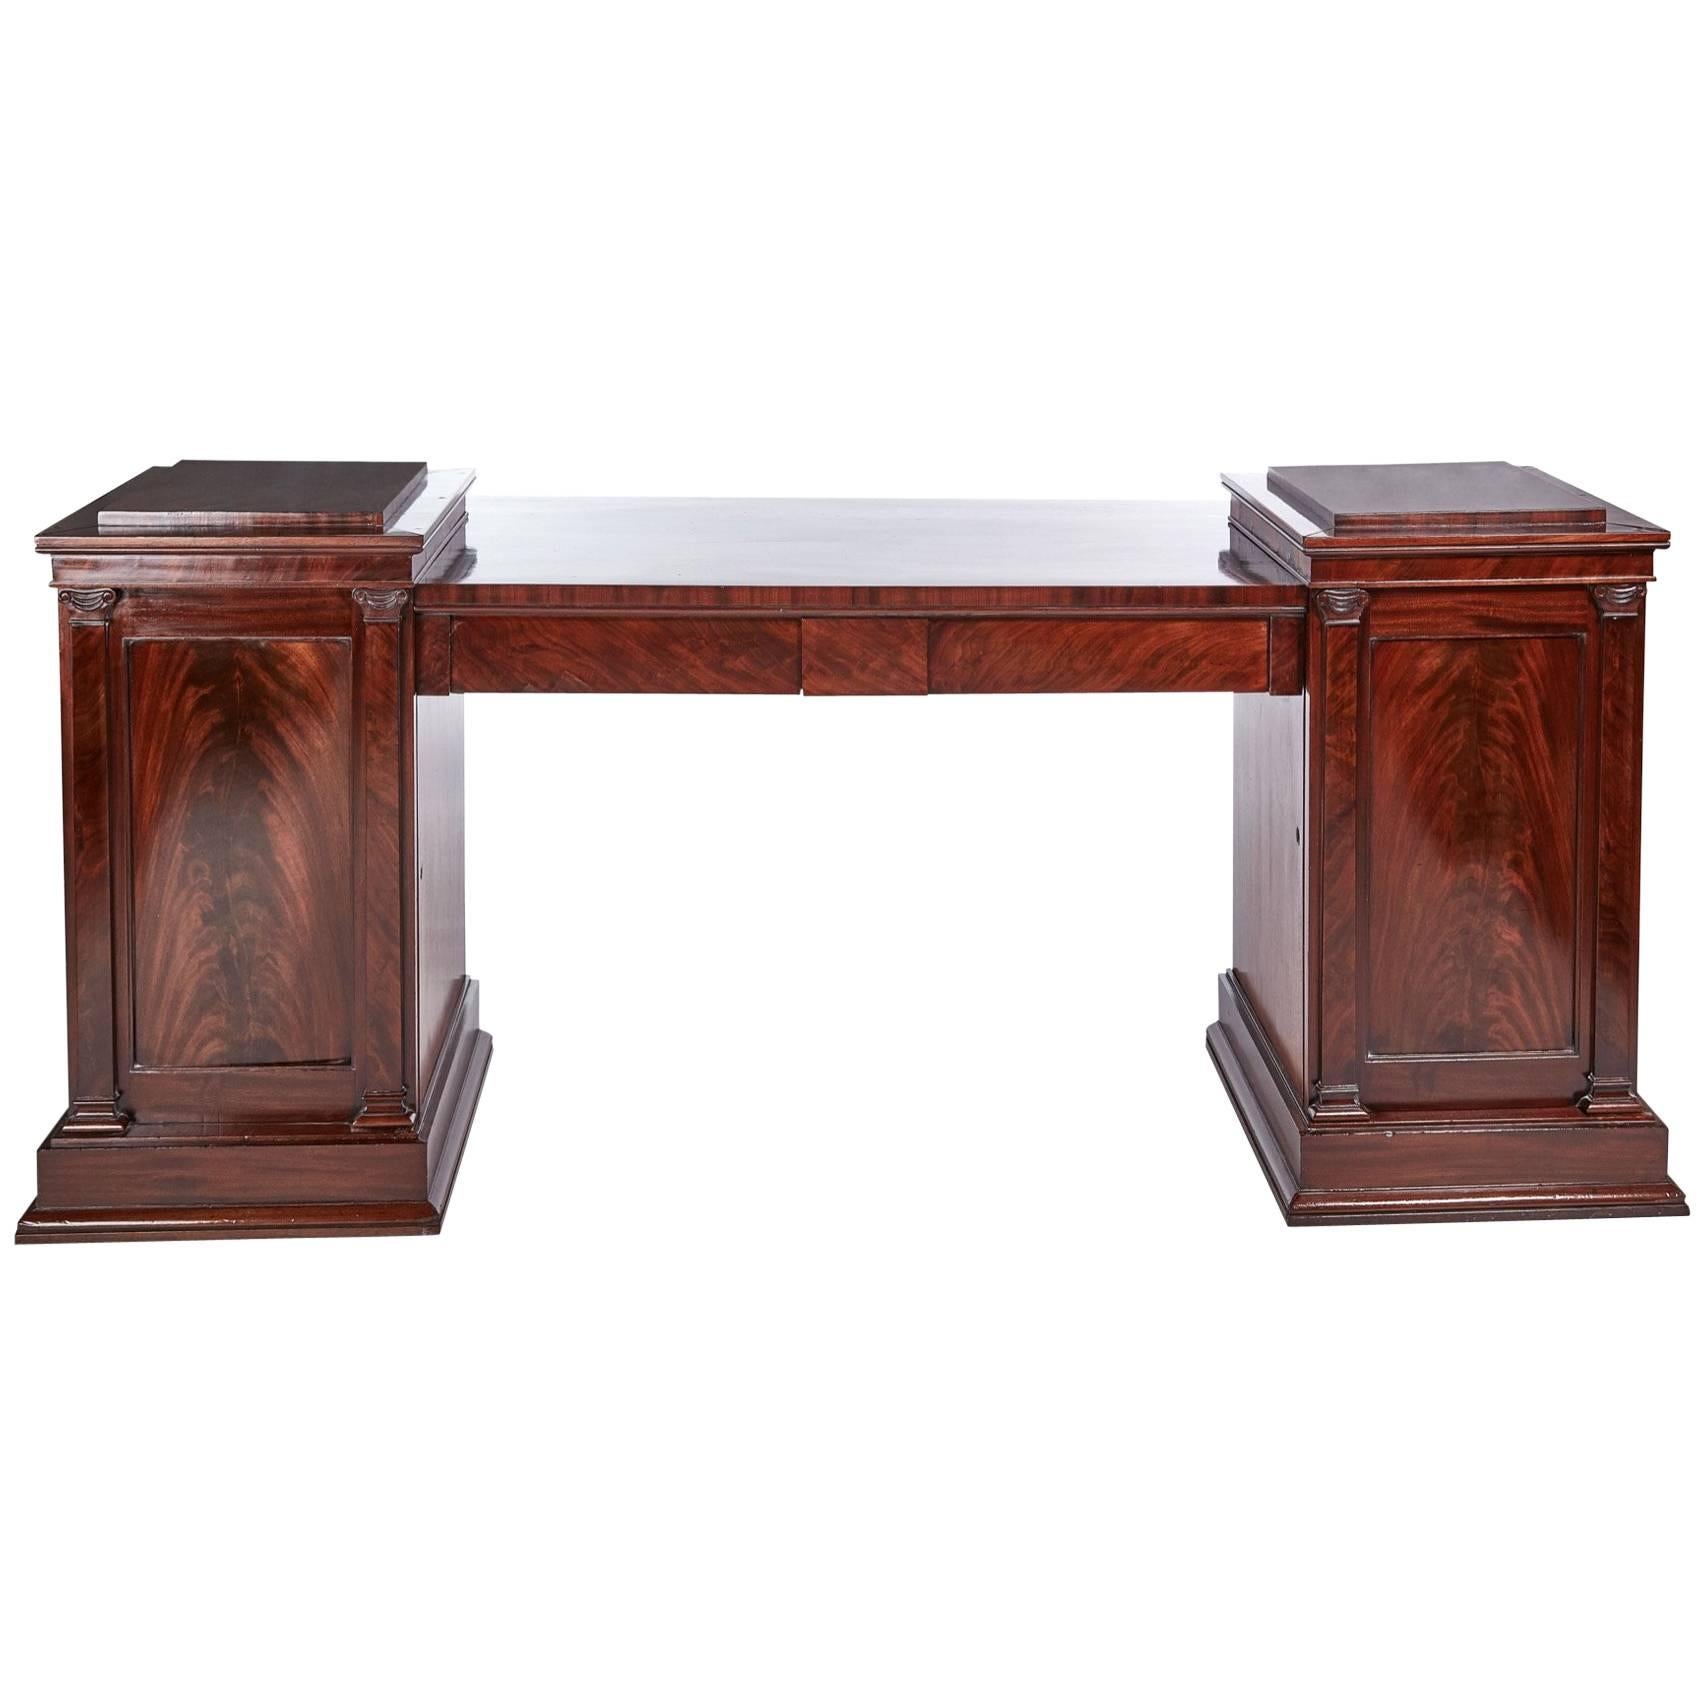 Outstanding Quality Antique Mahogany Pedestal Sideboard For Sale